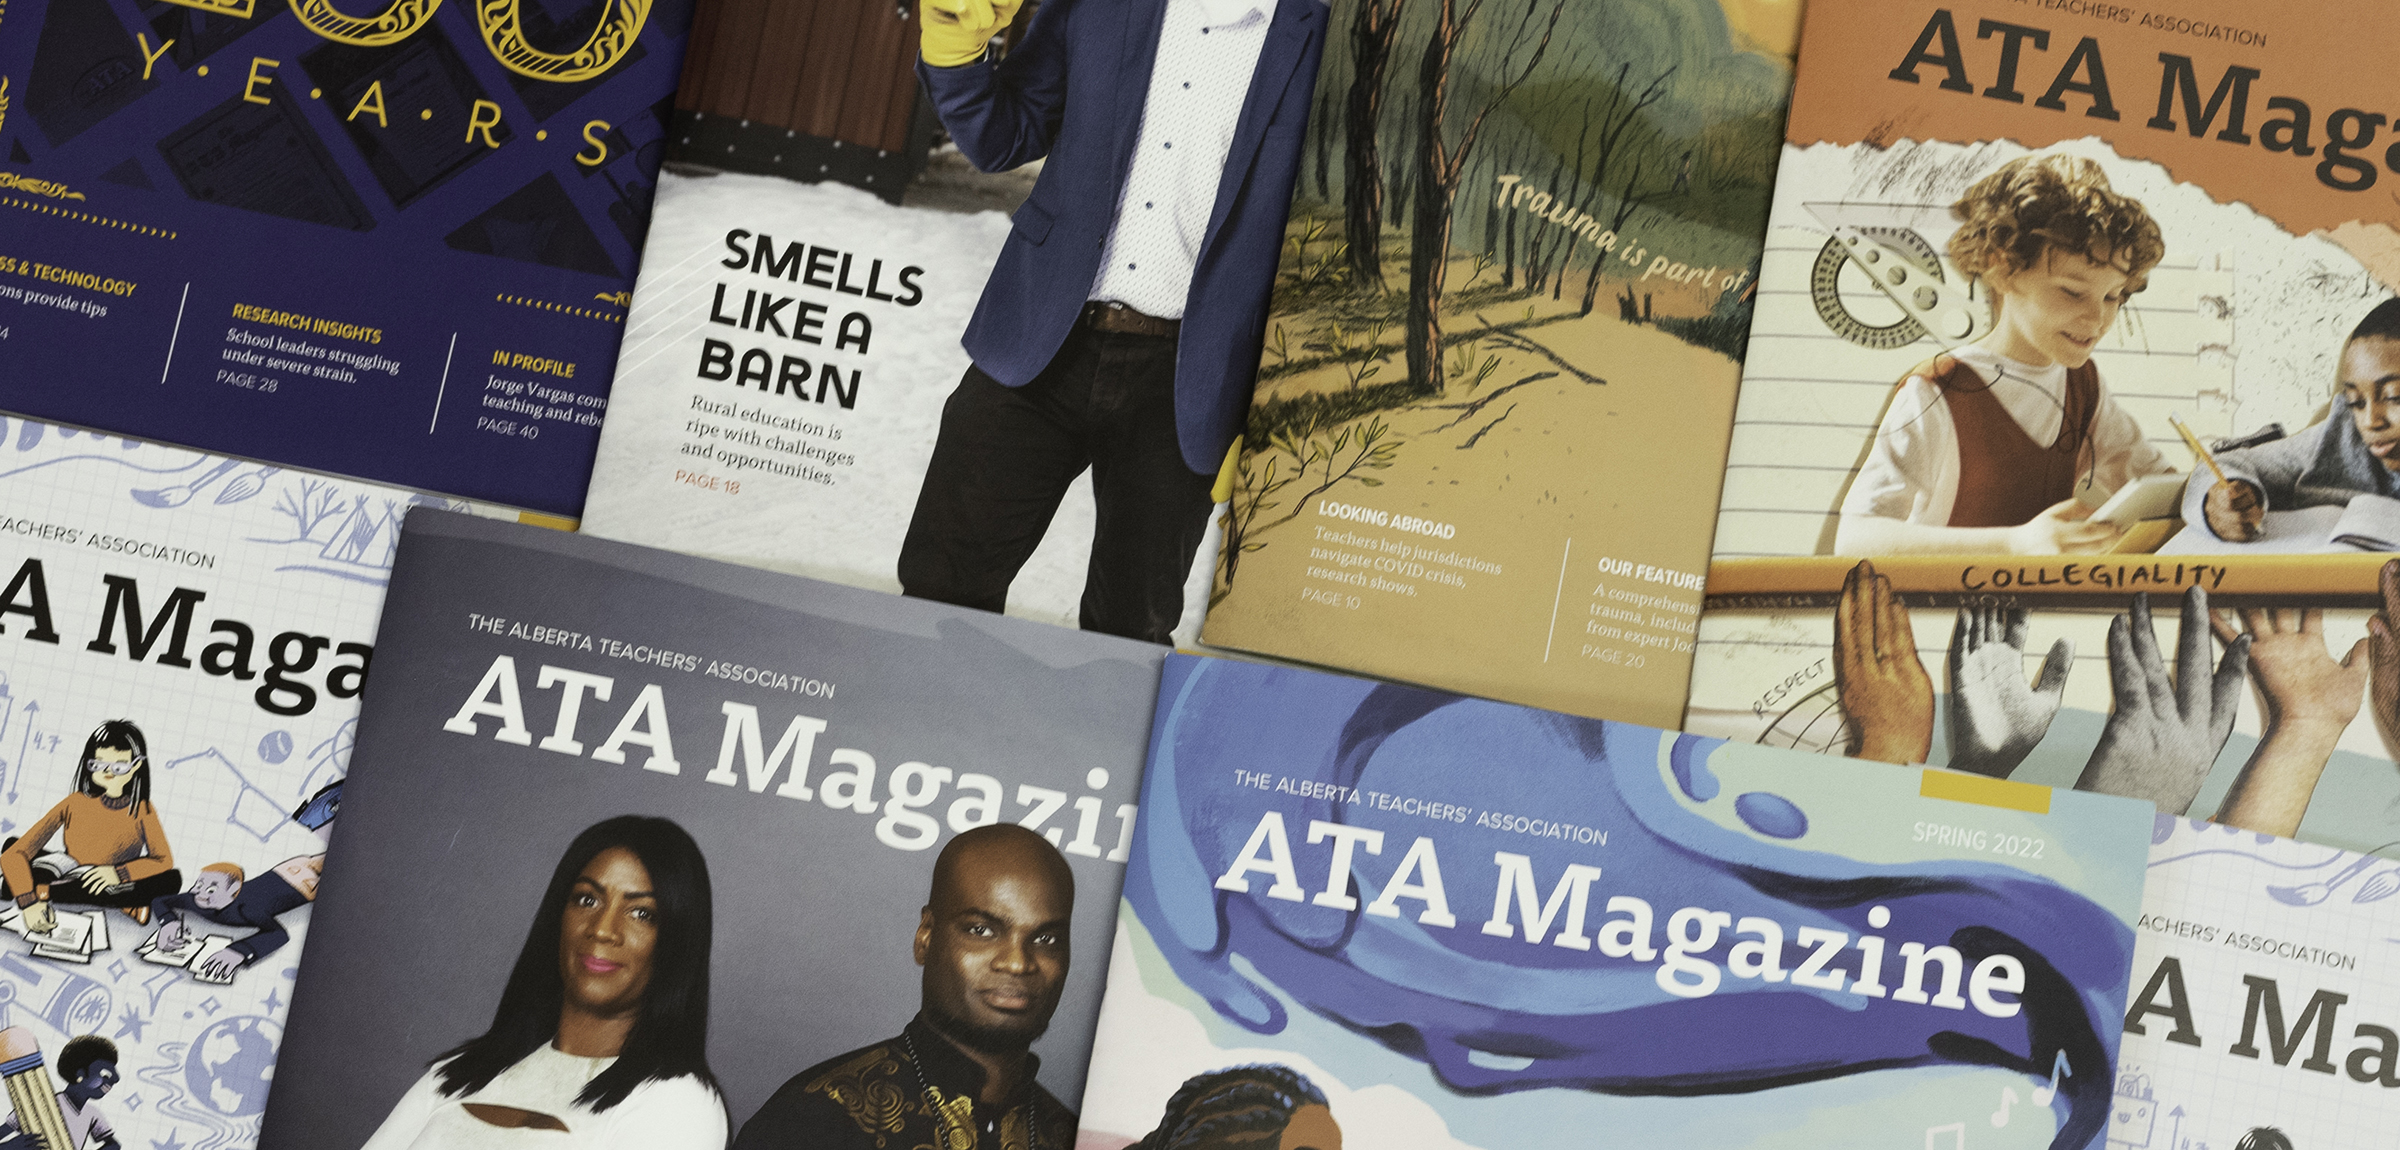 Various covers from the ATA Magazine